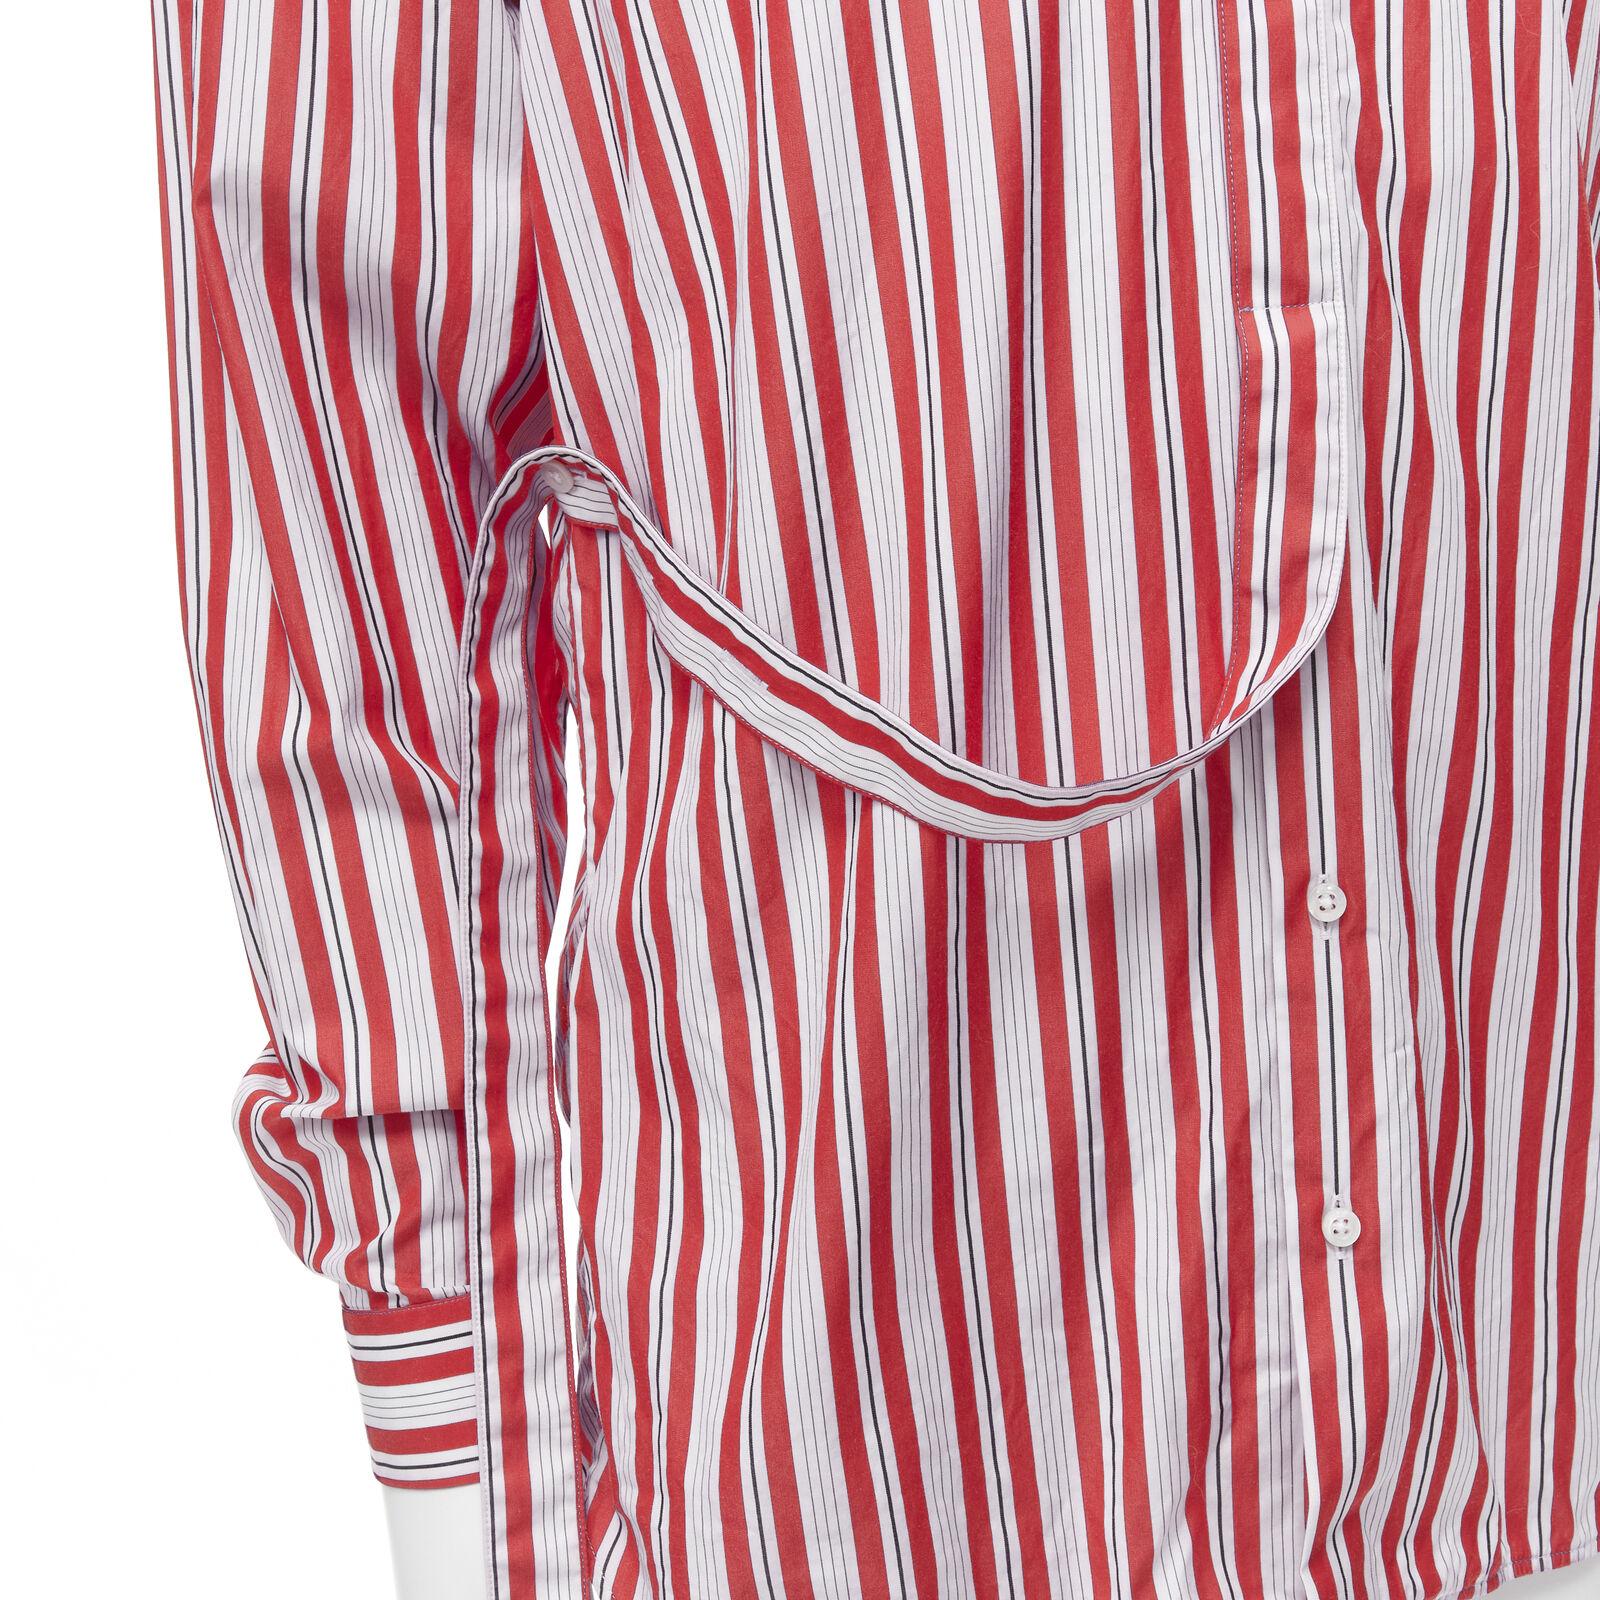 JIL SANDER 100% cotton red vertical stripes deconstructed placket shirt EU38 S
Reference: EDTG/A00078
Brand: Jil Sander
Designer: Jil Sander
Material: Cotton
Color: Red, White
Pattern: Striped
Closure: Button
Made in: Italy

CONDITION:
Condition: